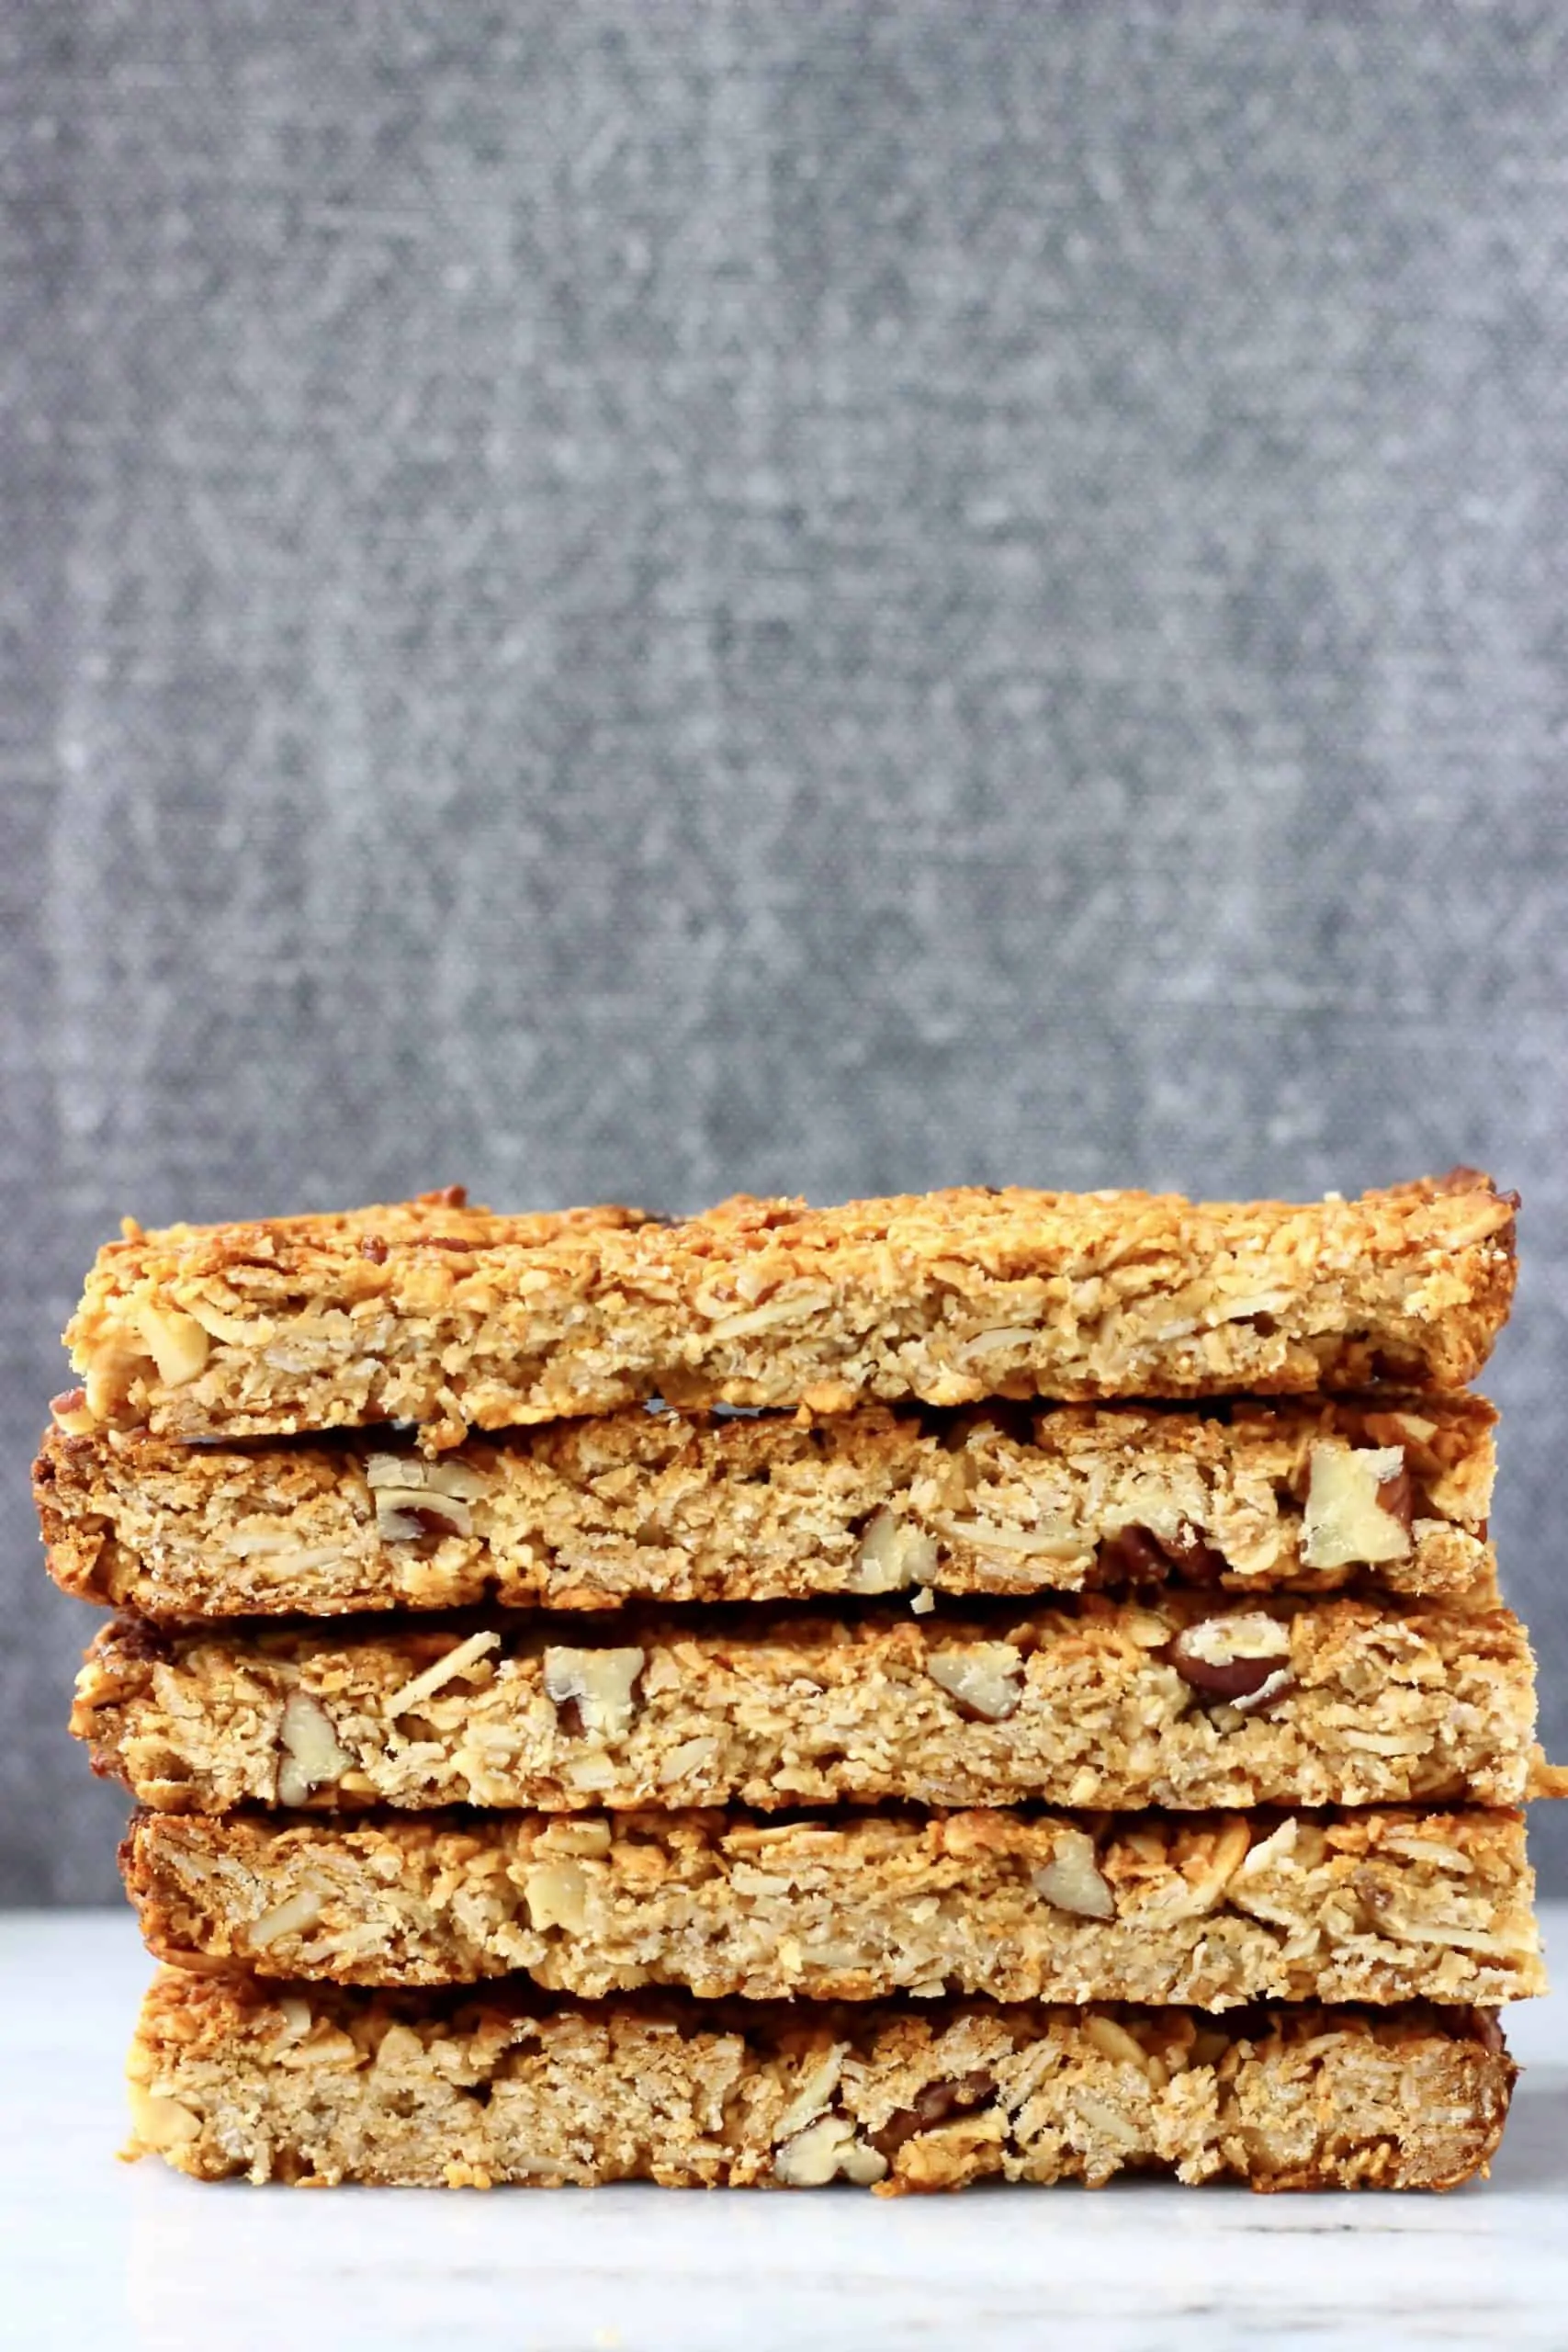 Five golden brown granola bars stacked on top of each other